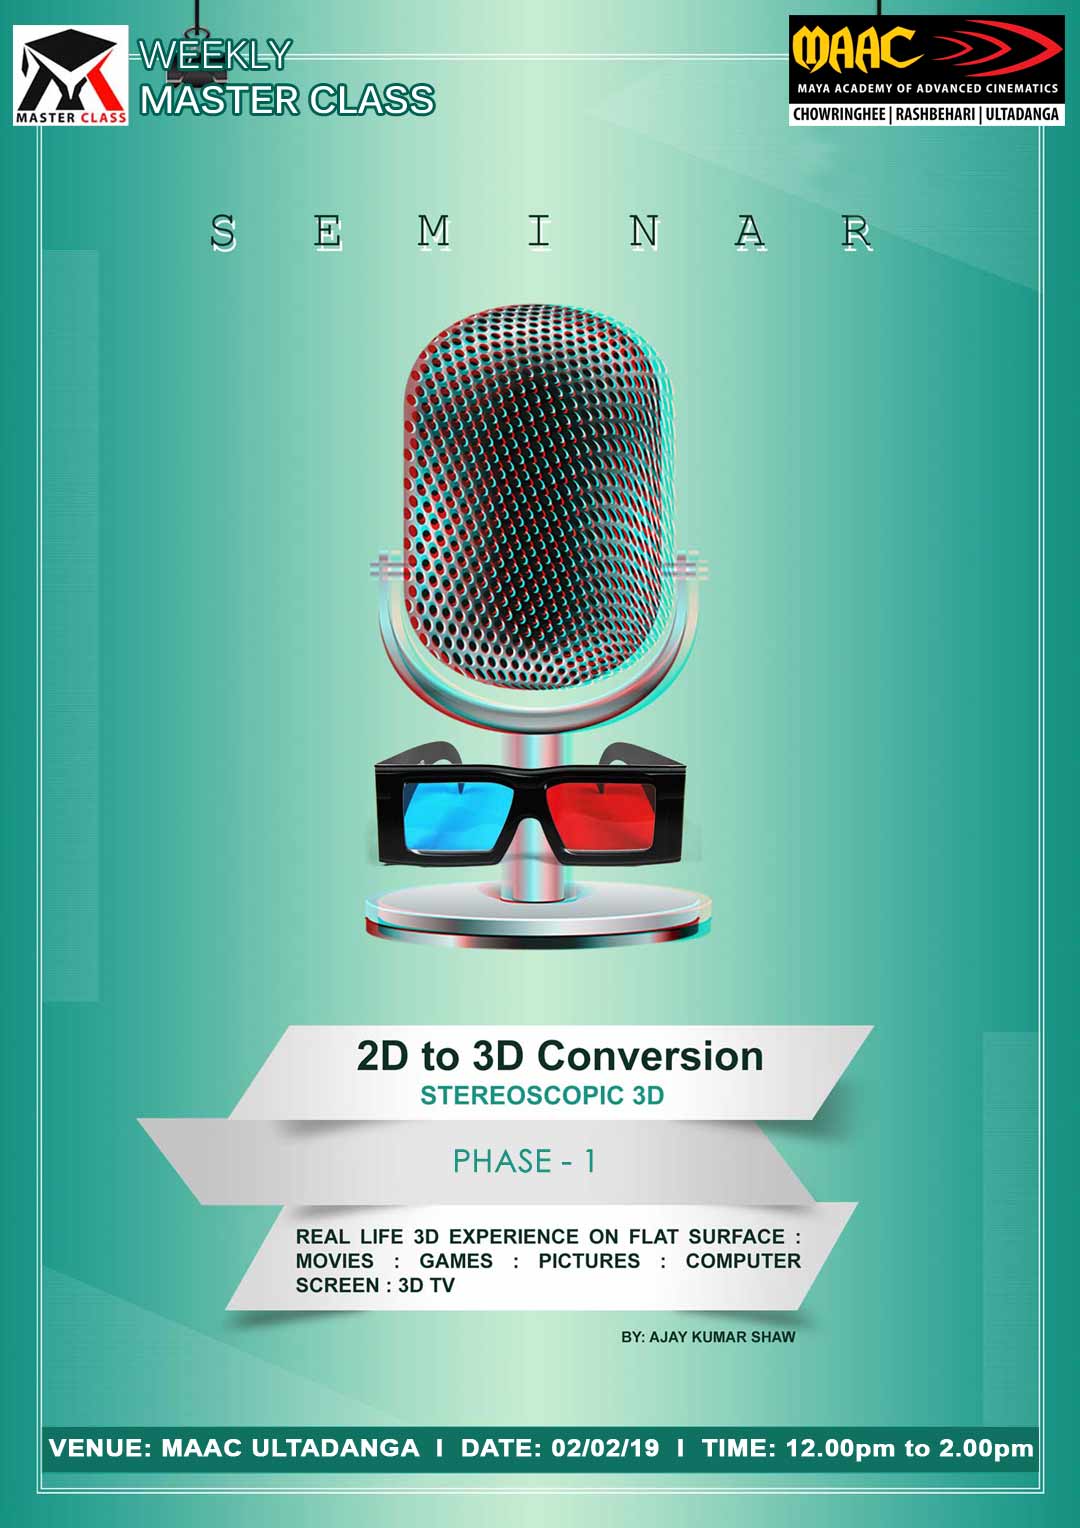 Weekly Master Class on 2D to 3D Conversion Phase 1